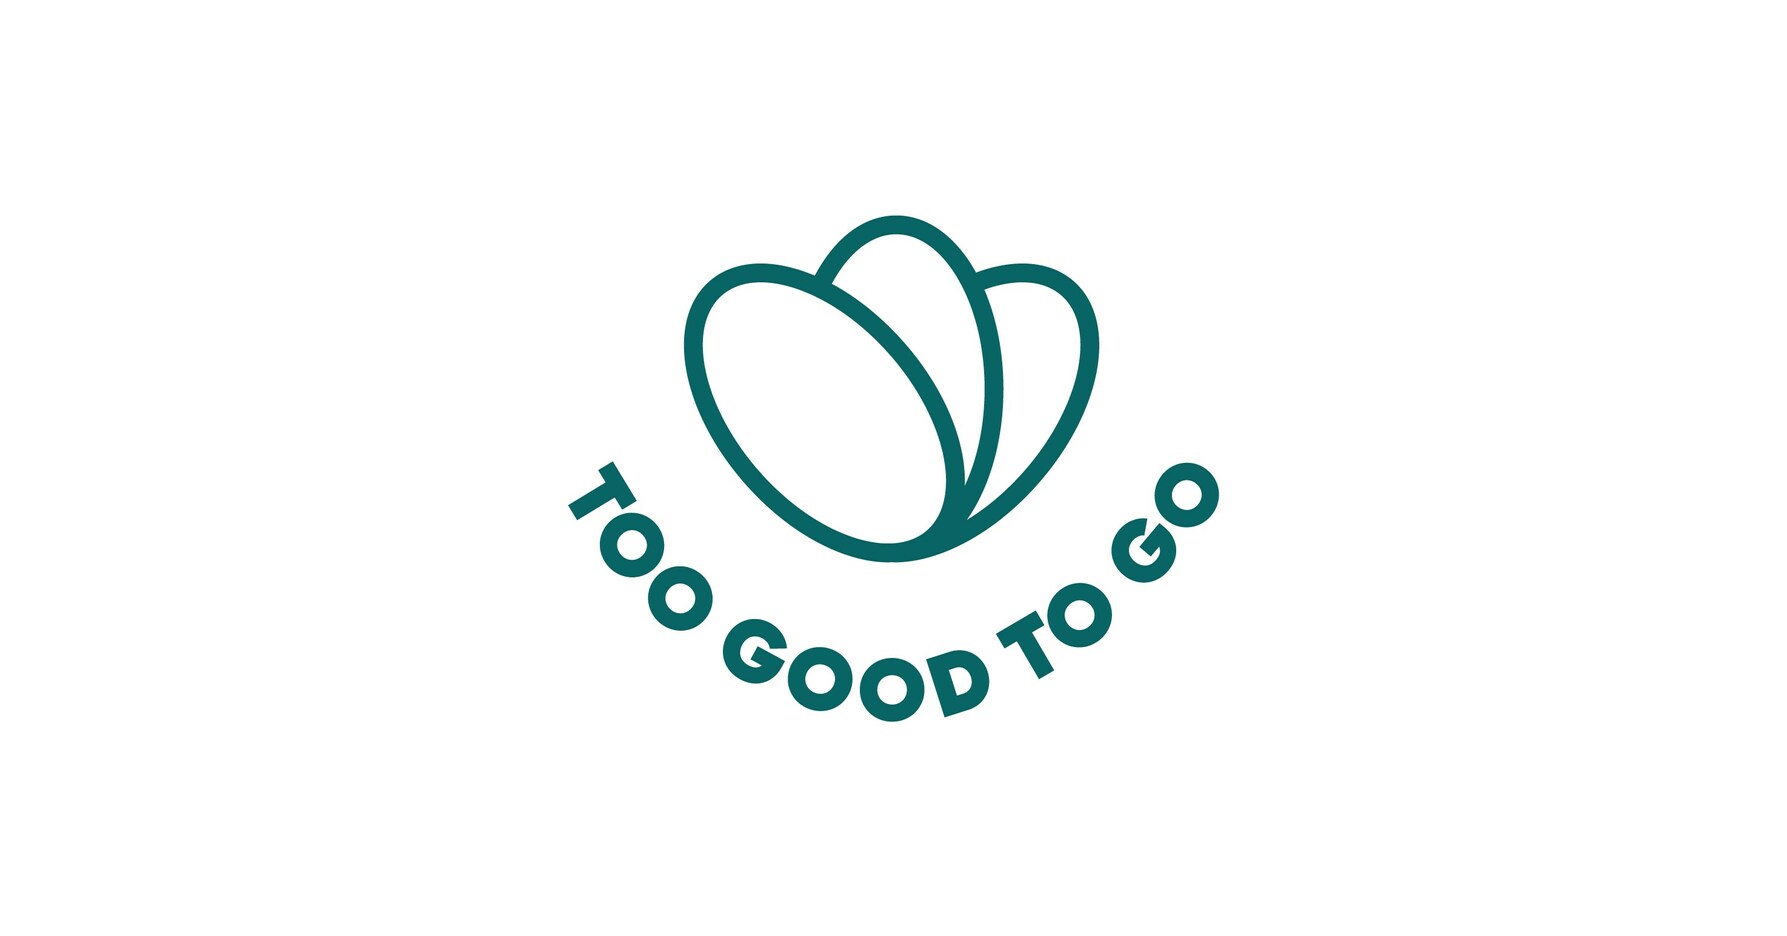 Everything is Bigger in Texas: Too Good To Go Announces Statewide Expansion